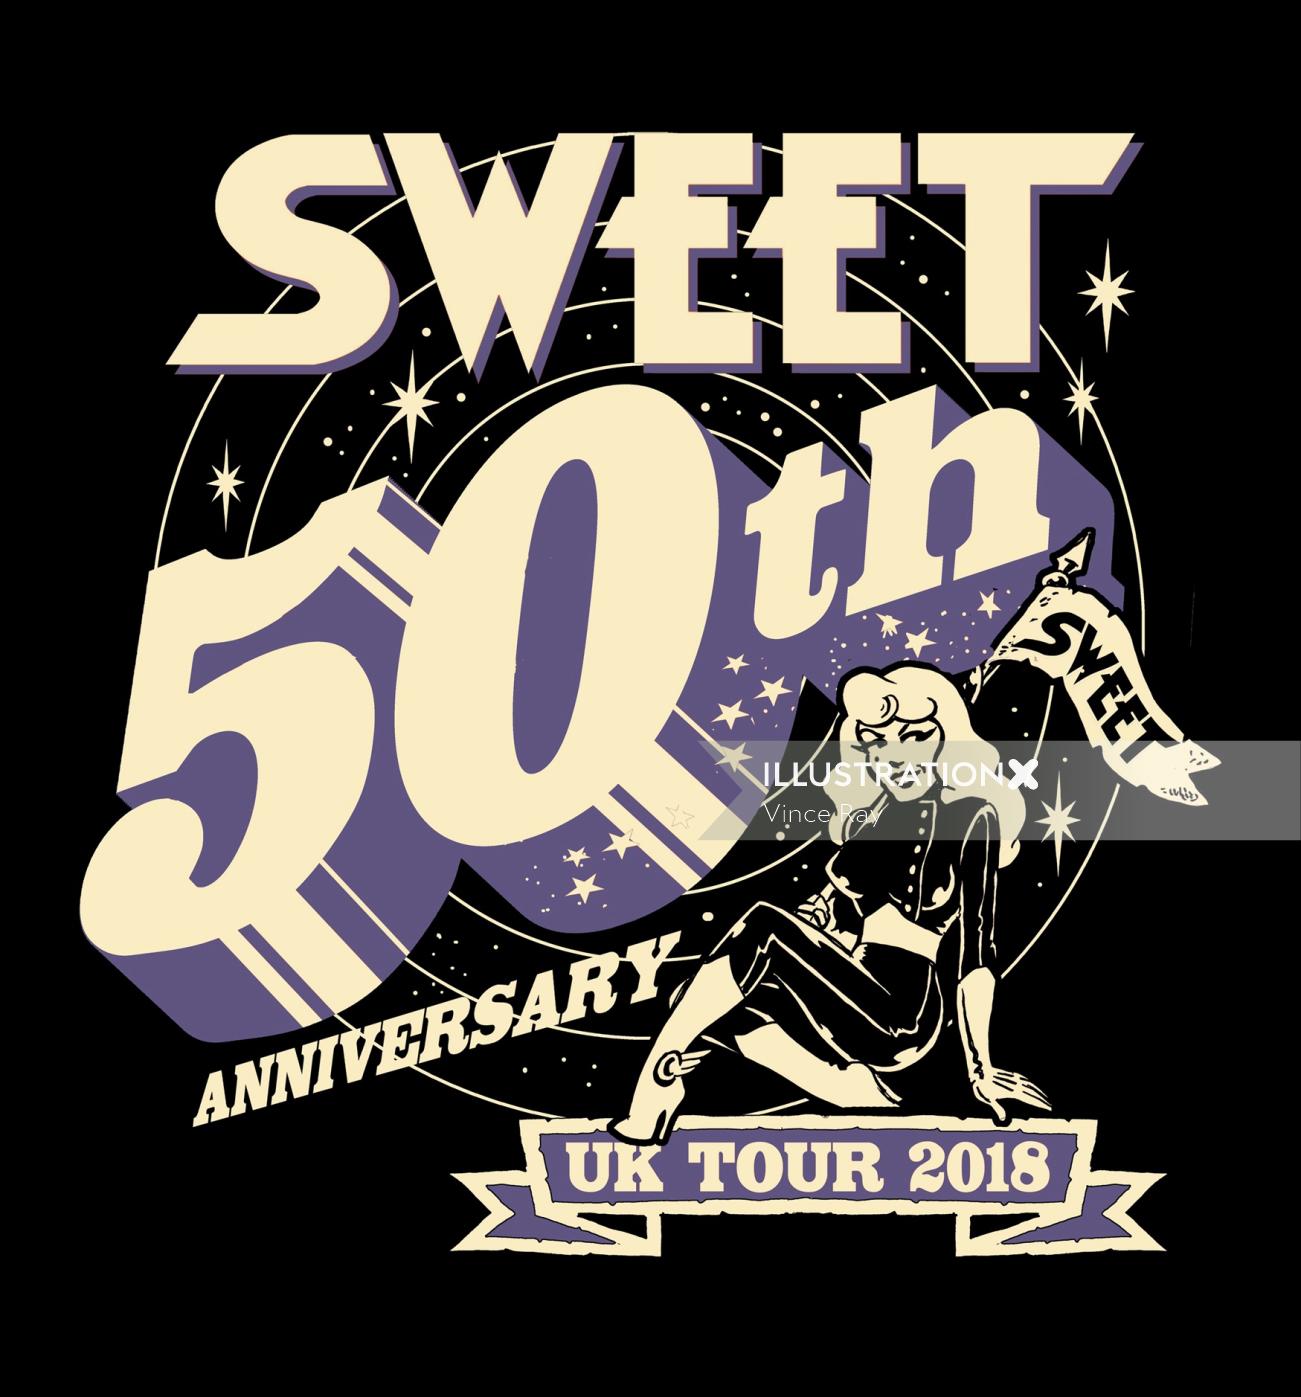 Lettering art of sweet 50th anniversary 